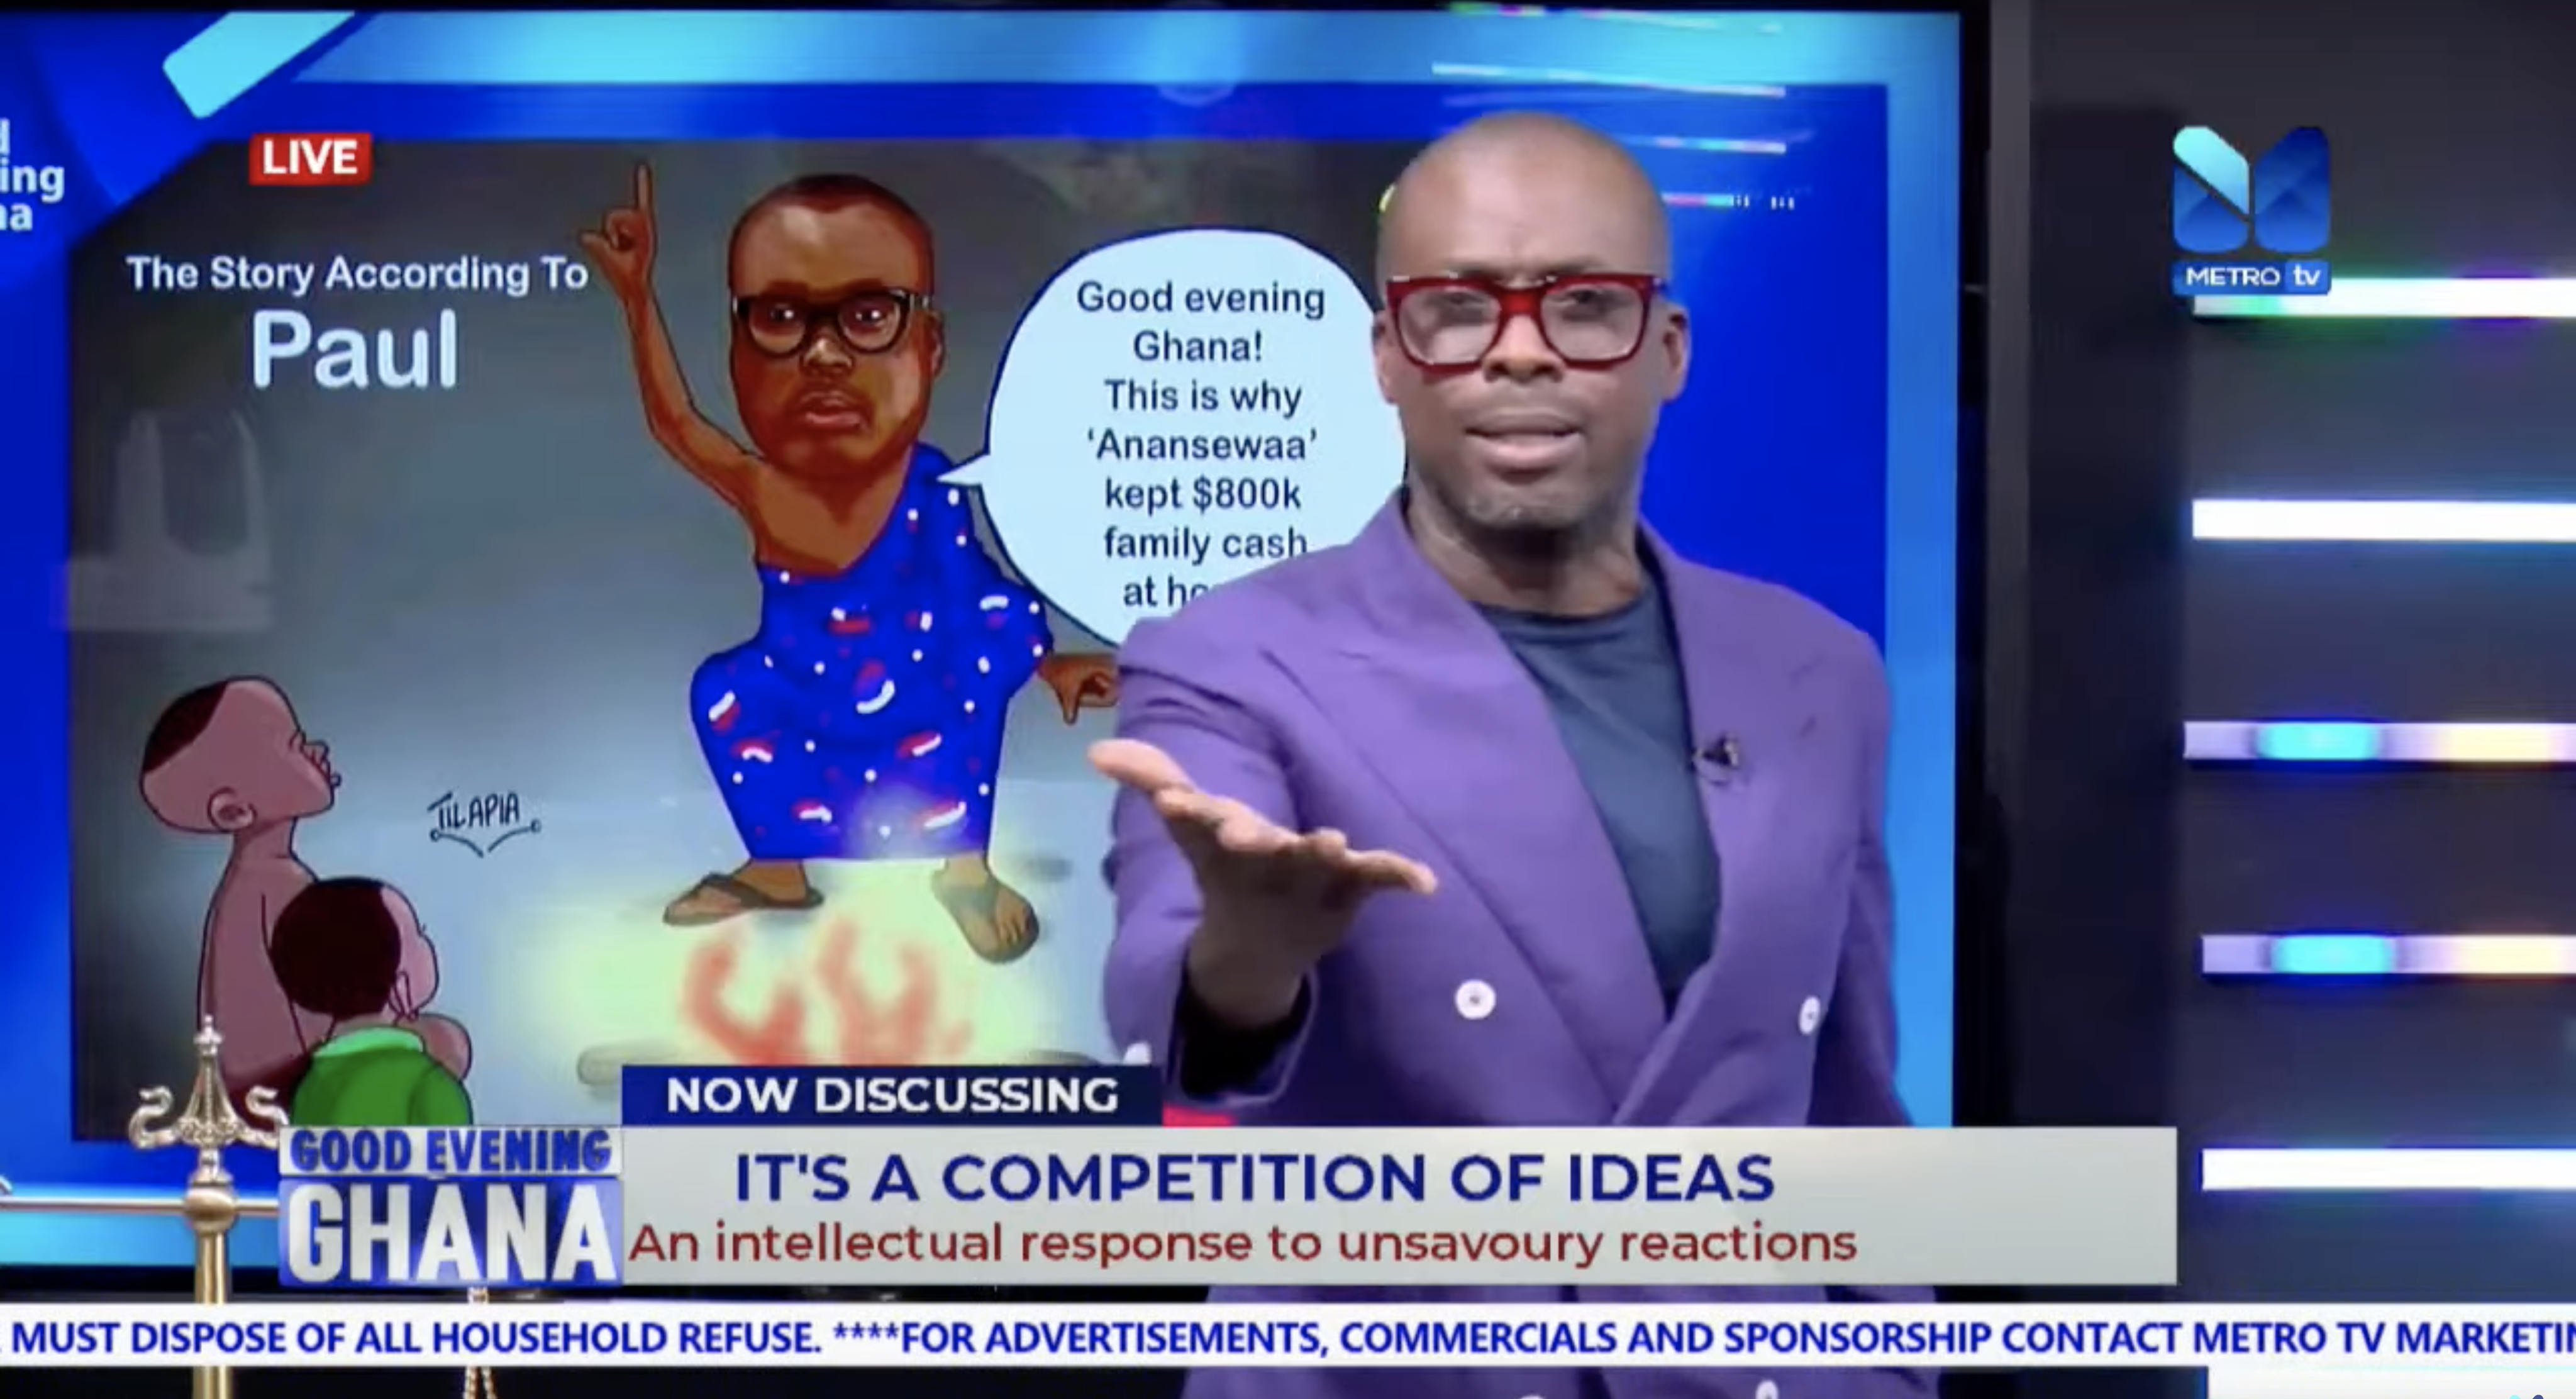 LIVESTREAM: Good Evening Ghana with Paul Adom-Otchere || ‘An Intellectual Response to Unsavoury Reactions’